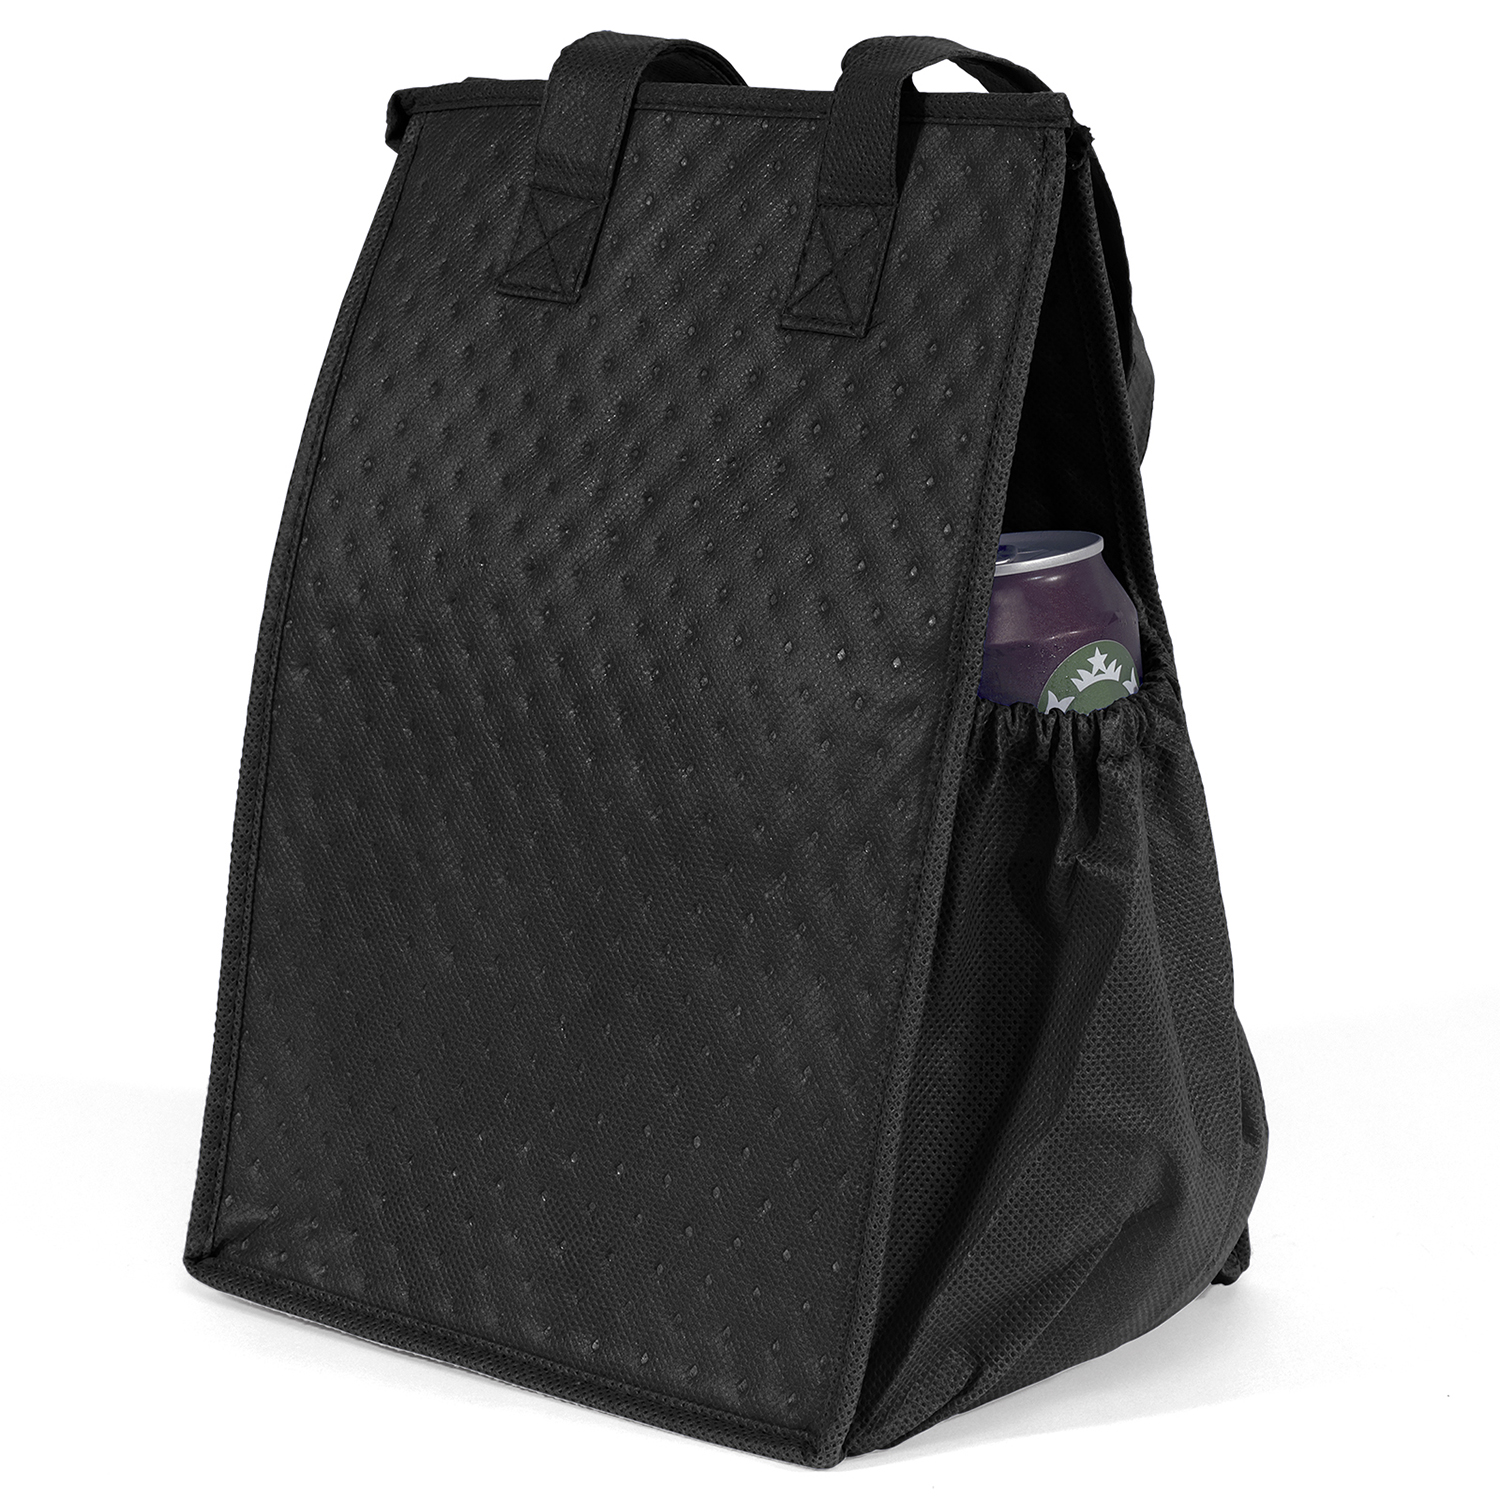 Bag Makers CVAC812 - Custom Printed Eco-Friendly Insulated Promotional Non-Woven Snack Tote